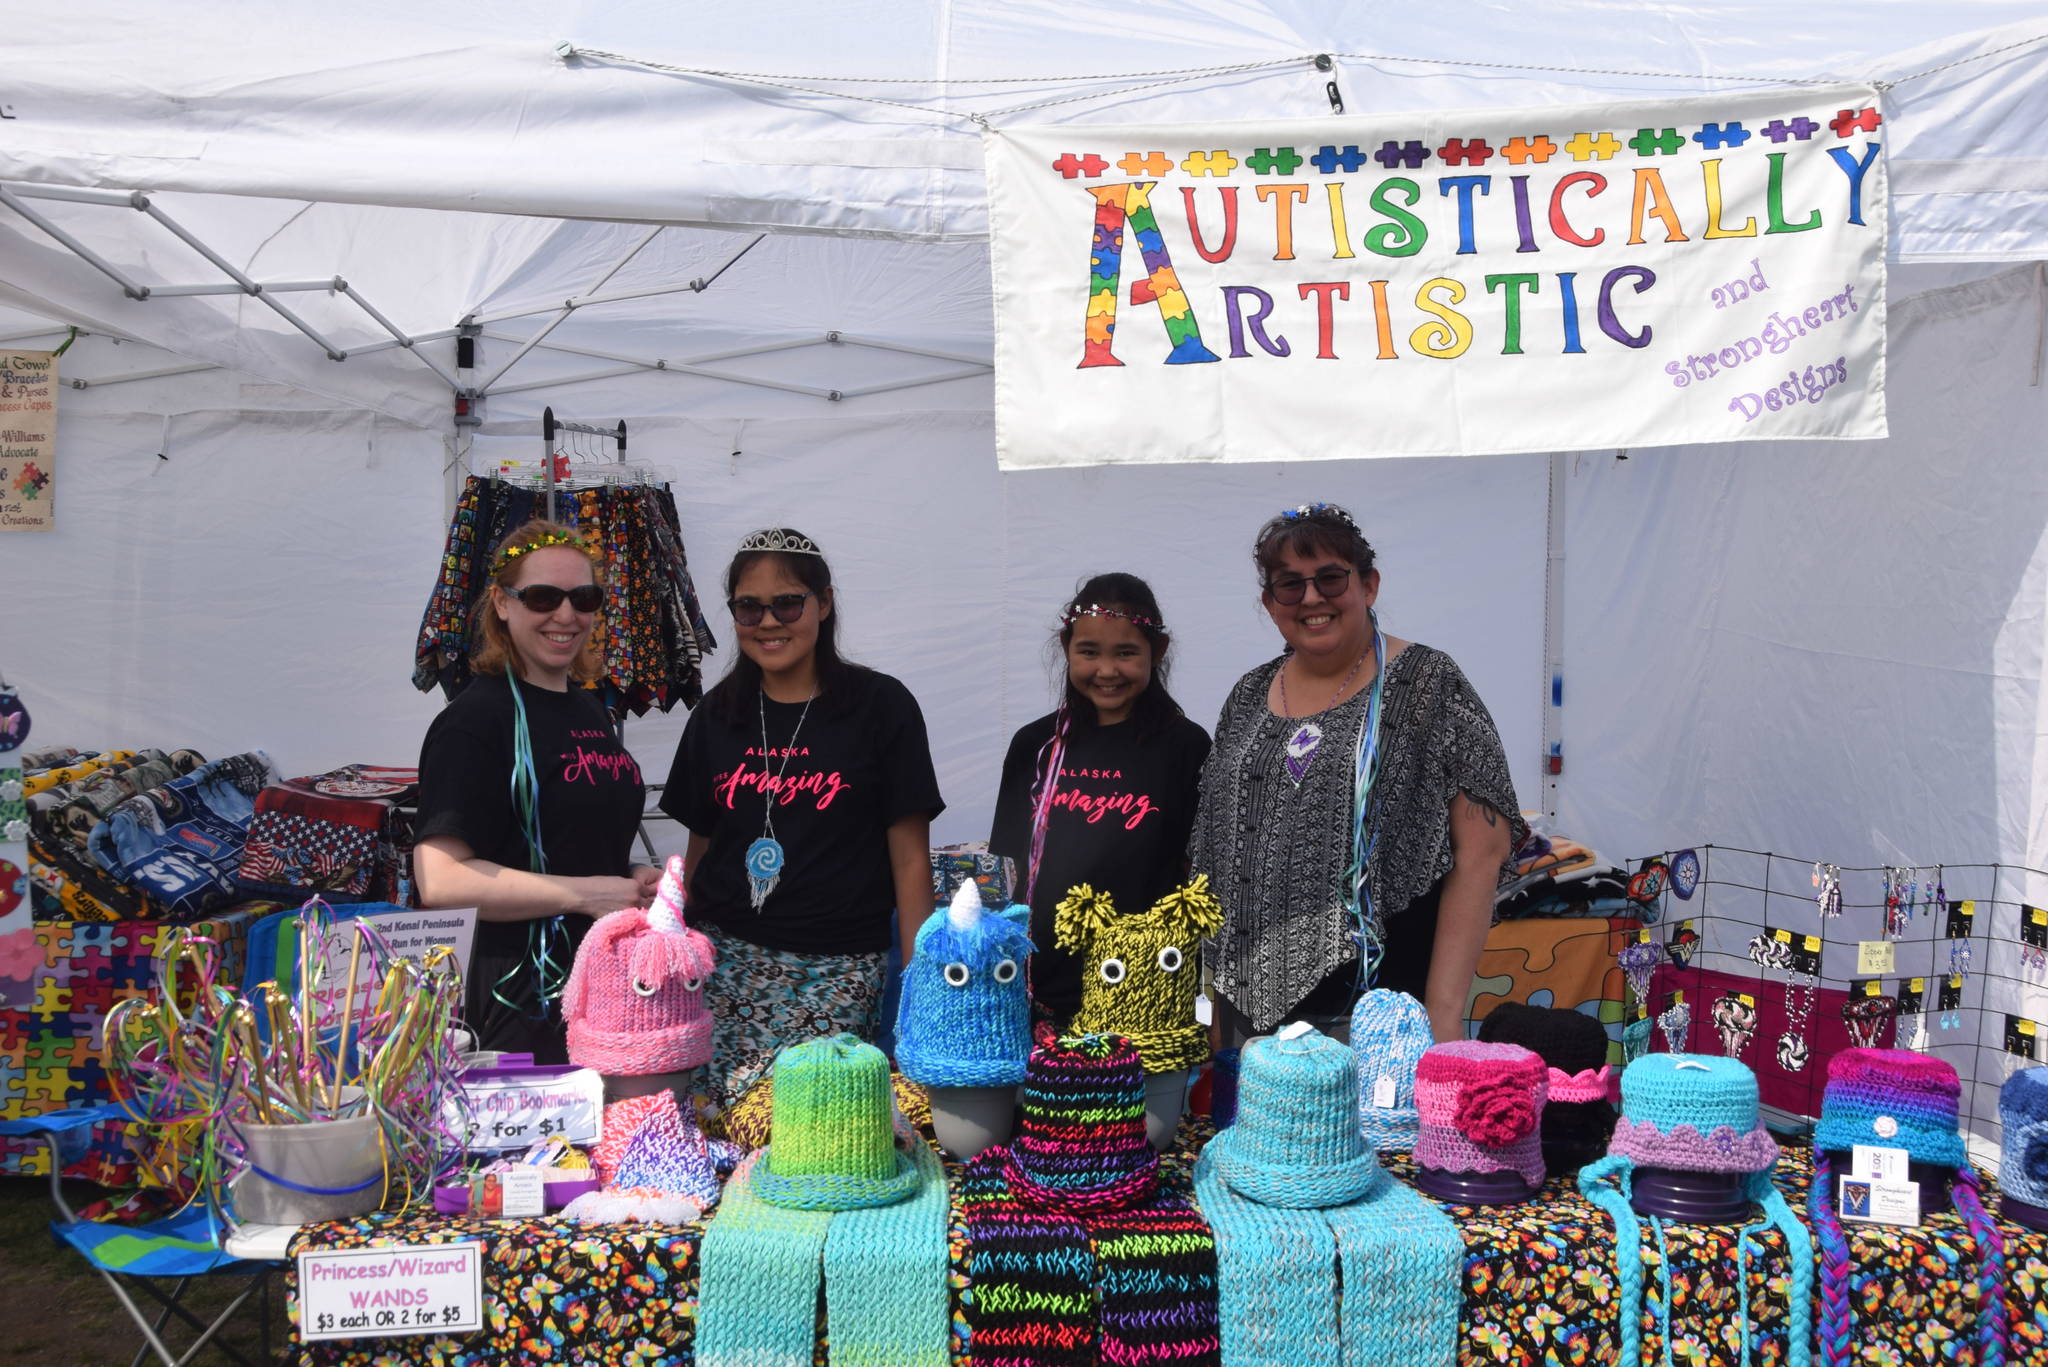 From left, Jennifer Pelka, Cece Strongheart, Glenna Strongheart and Ann Strongheart pose for a photo at their vendor booth during the 2019 Disability Pride Celebration in Soldotna Creek Park on July 20, 2019. Cece, who is autistic, knits hats and makes various crafts to sell such as bookmarks and stickers. (Photo by Brian Mazurek/Peninsula Clarion)